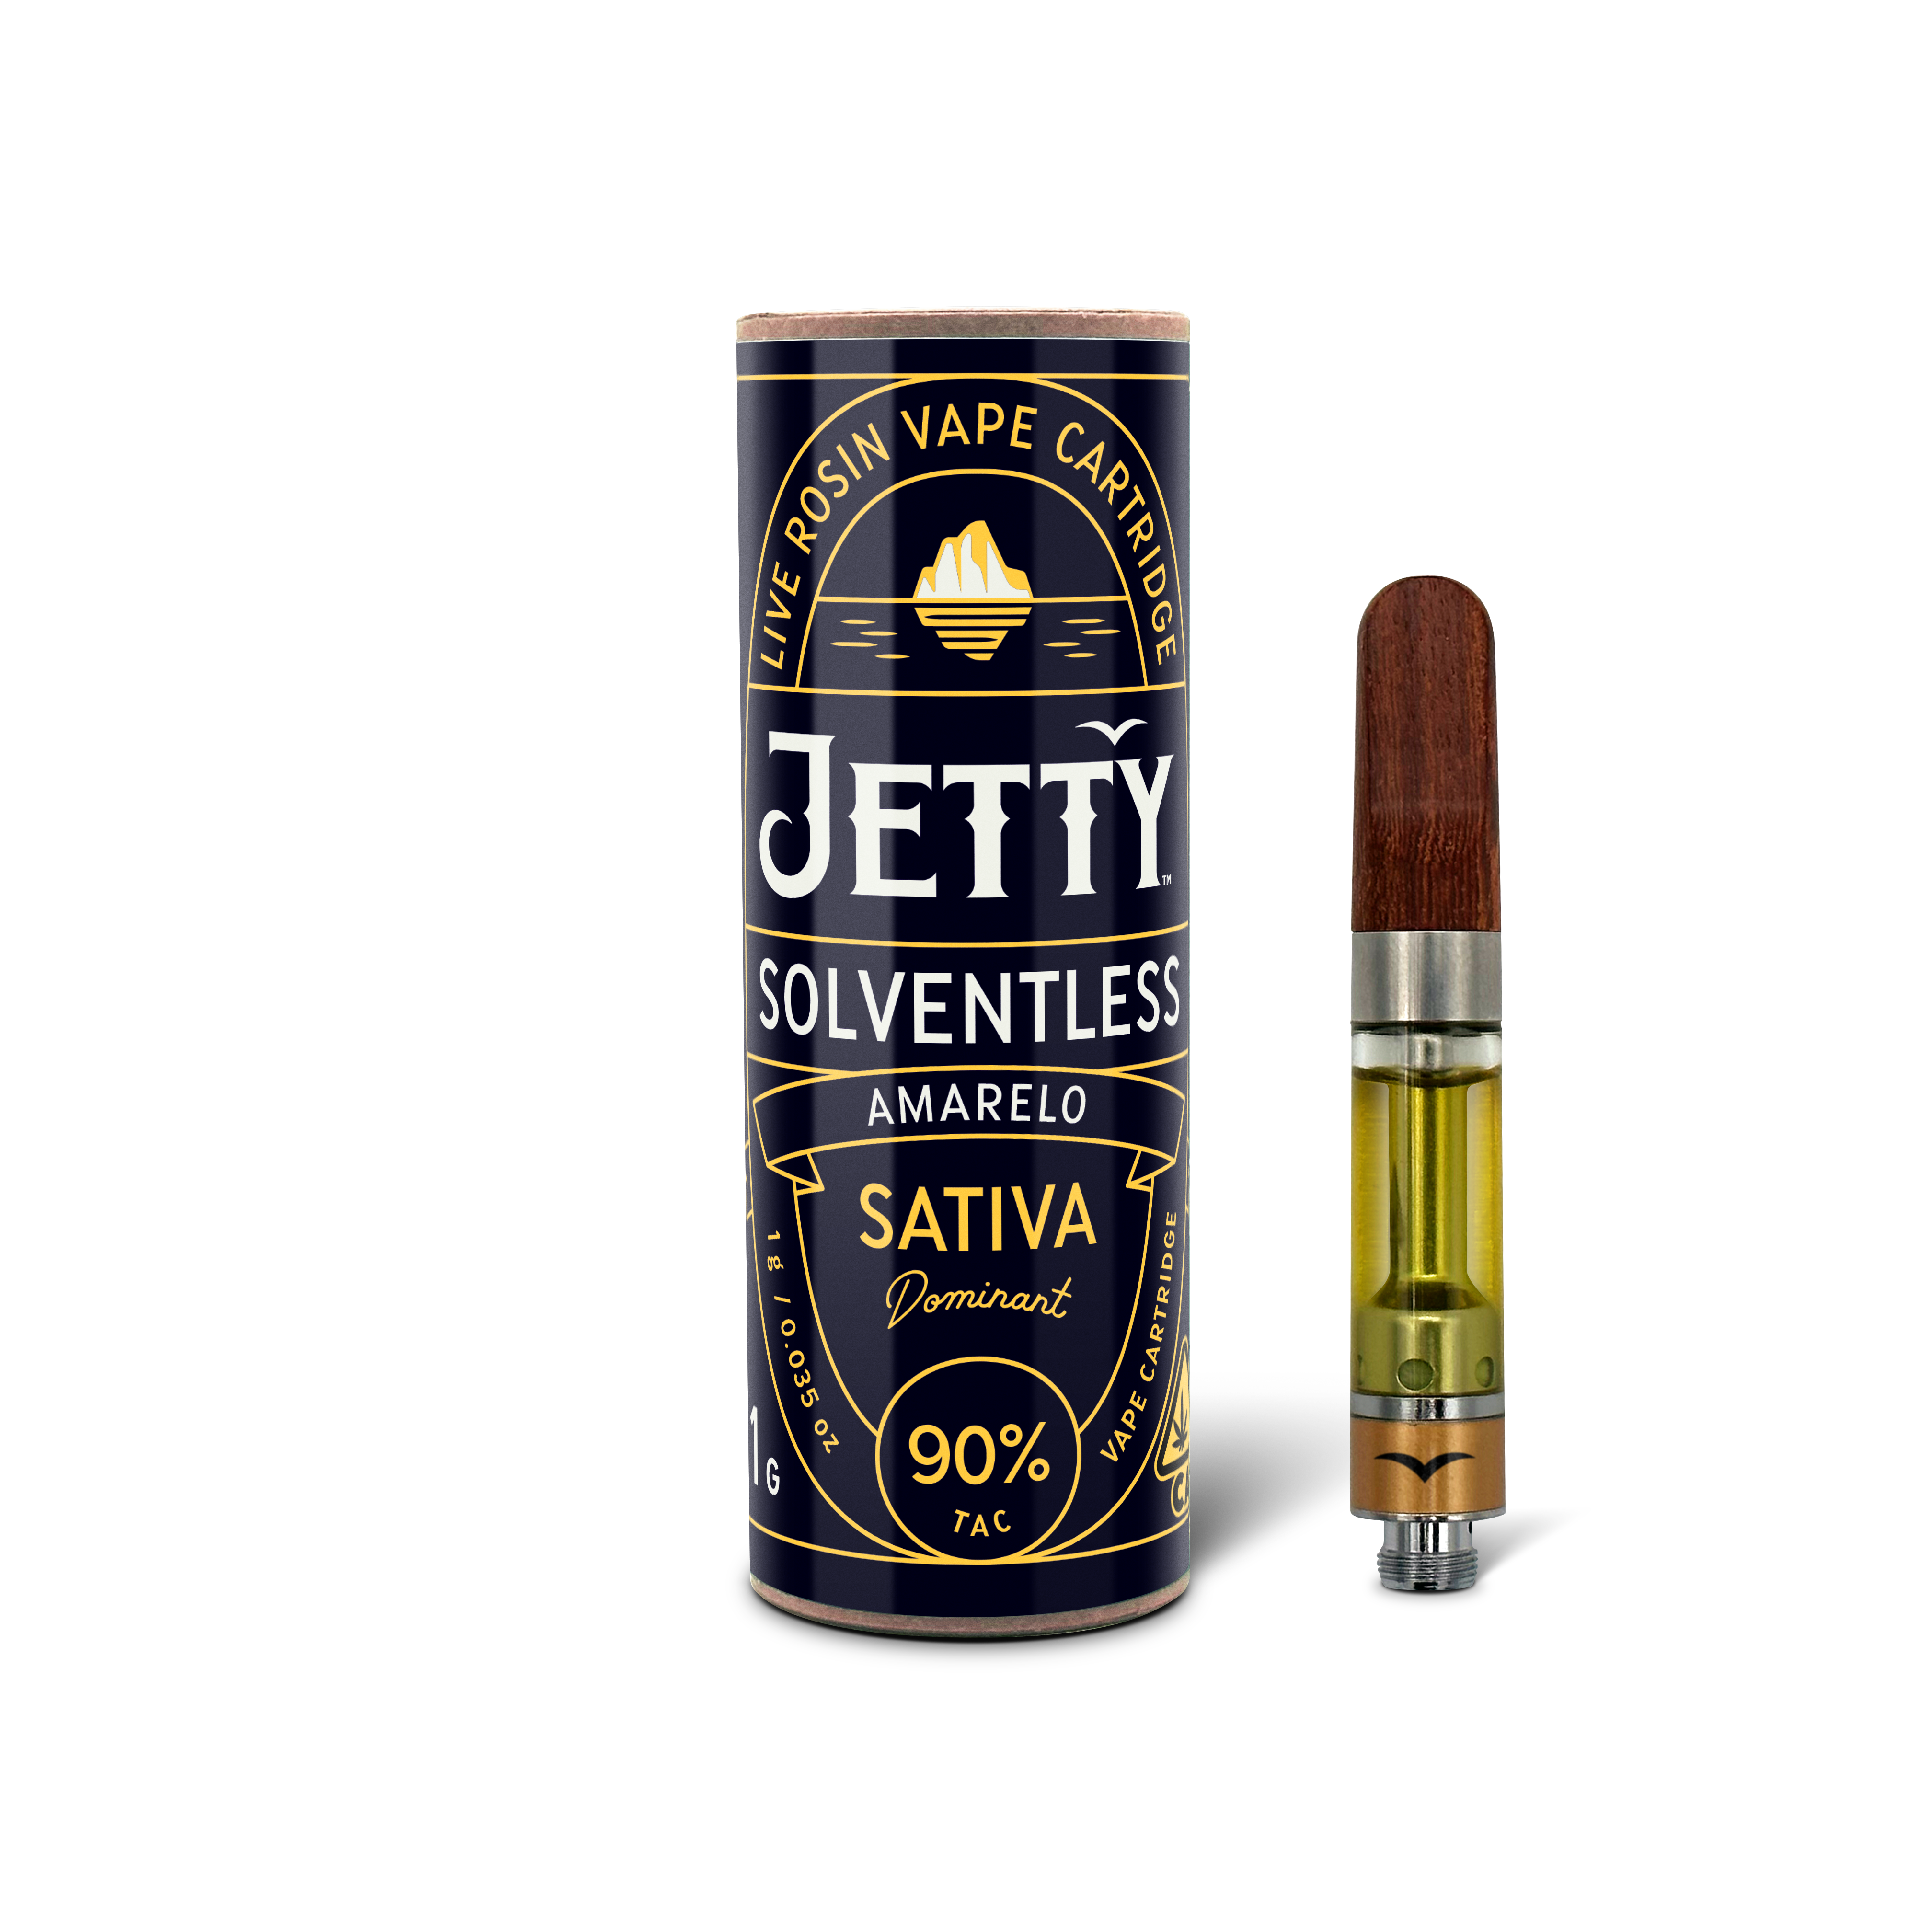 A photograph of Jetty Cartridge 1g Solventless Amarelo